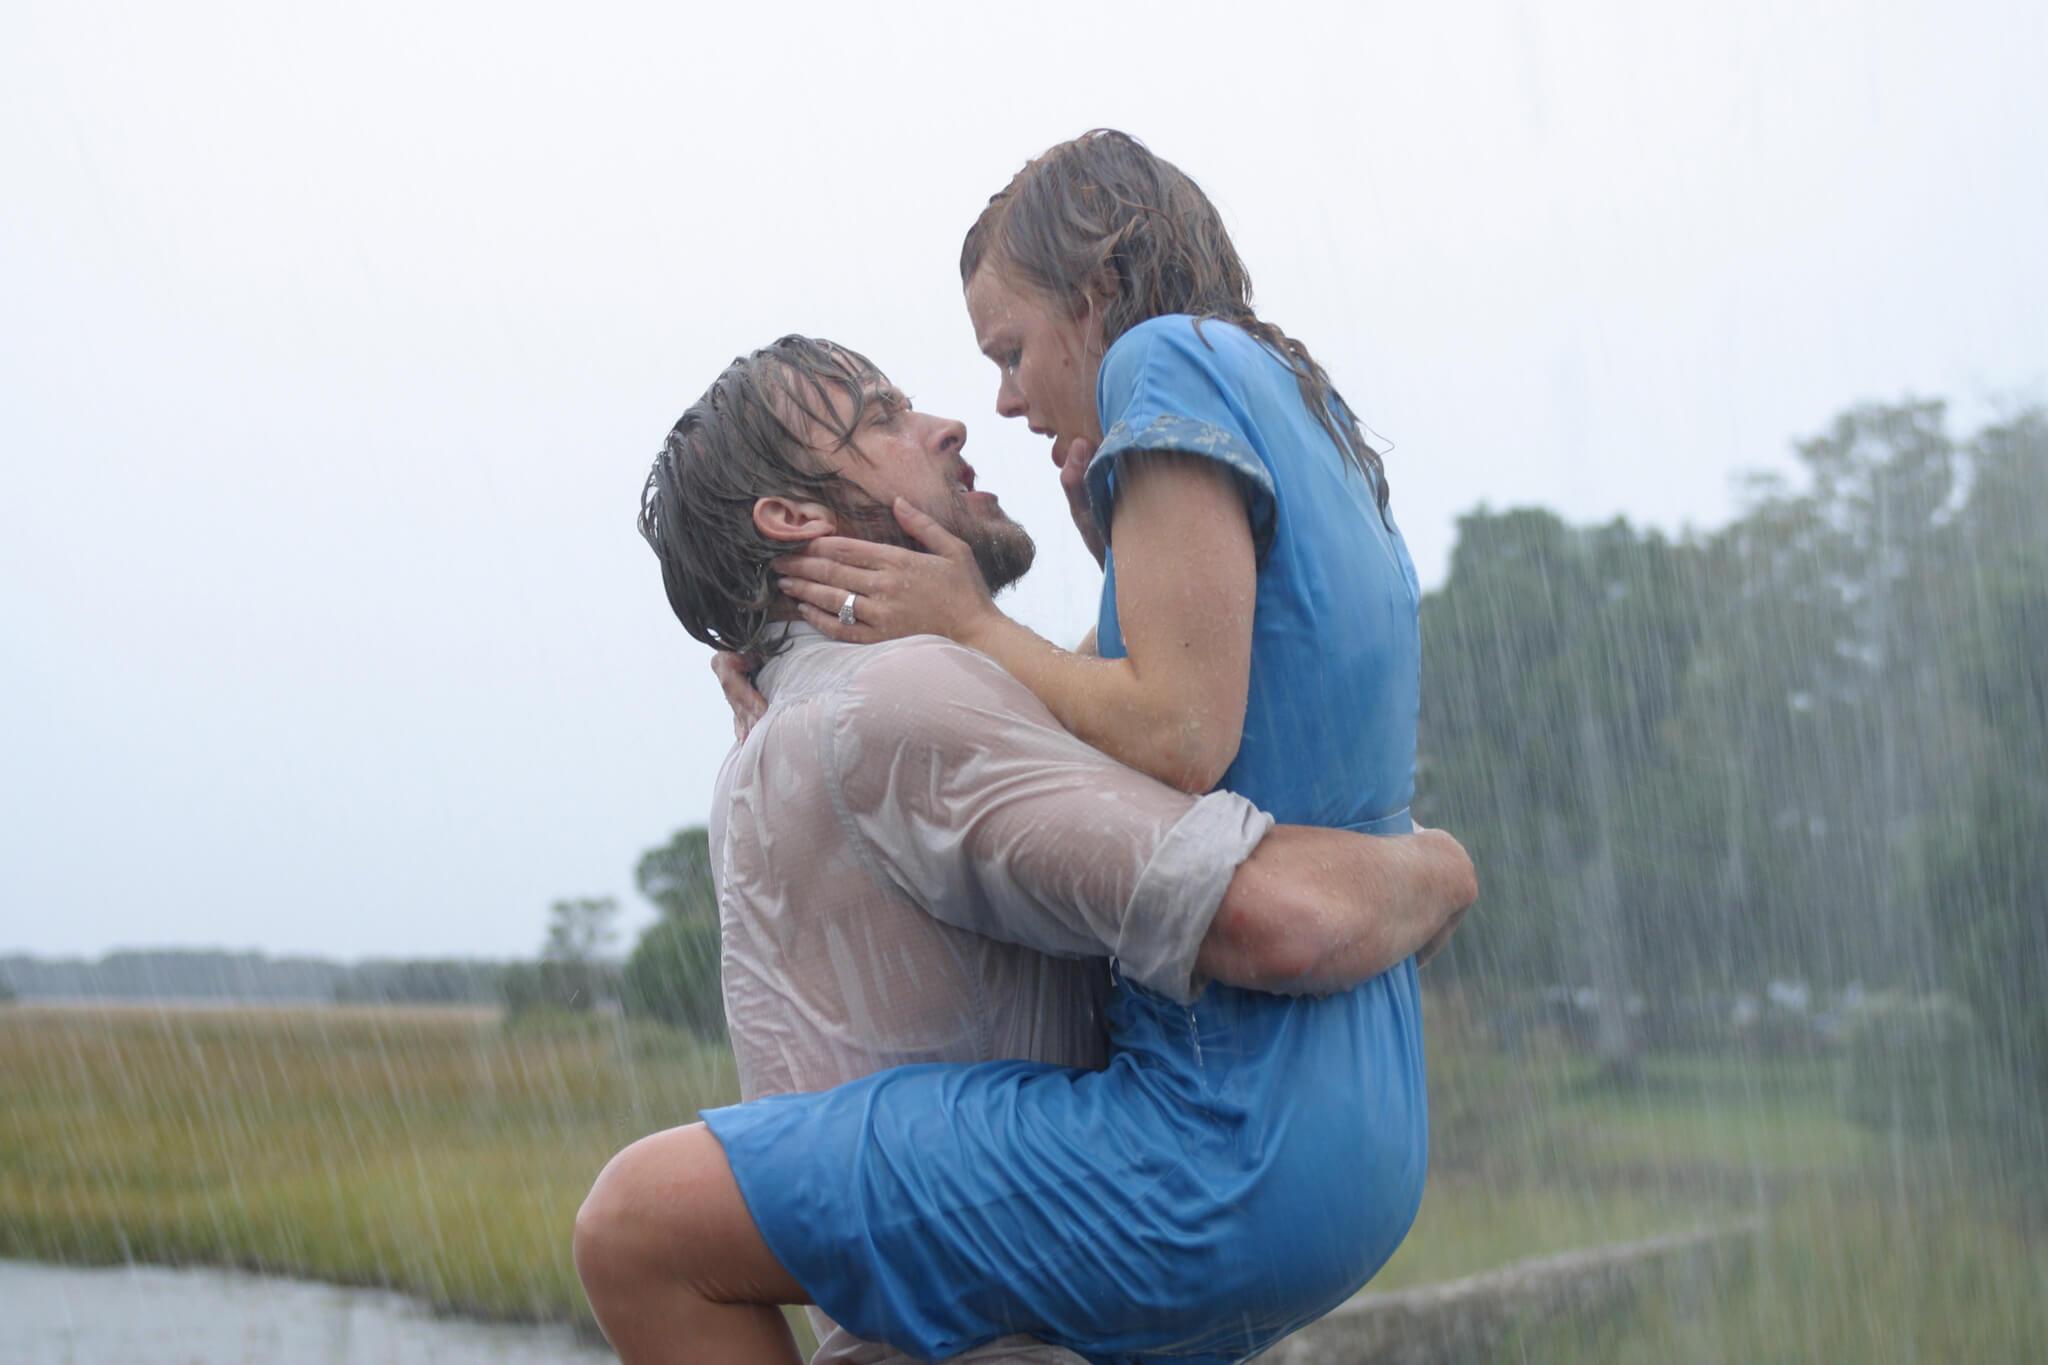 "The Notebook" (2004)